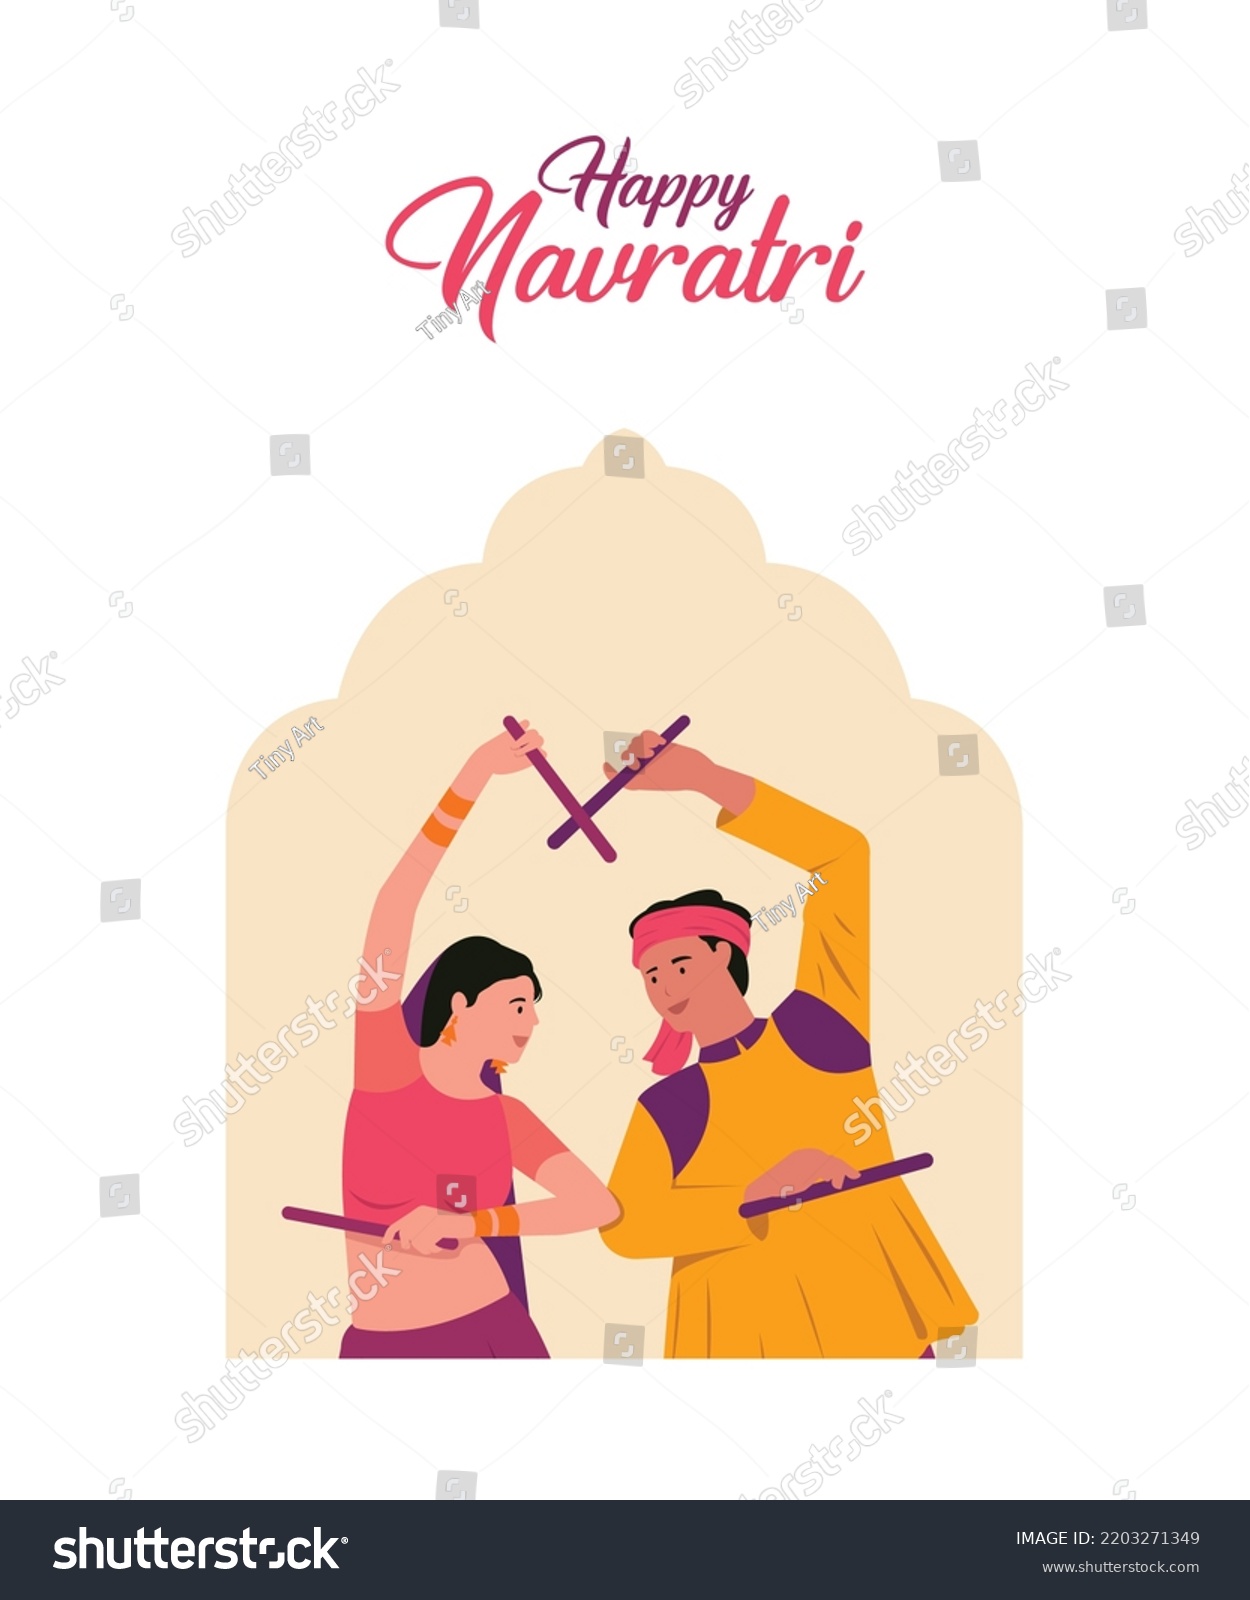 SVG of Happy Navratri Text with vector illustration of Woman and Man playing Dandiya dance, Garba night poster for Navratri Dussehra festival of India.

 svg